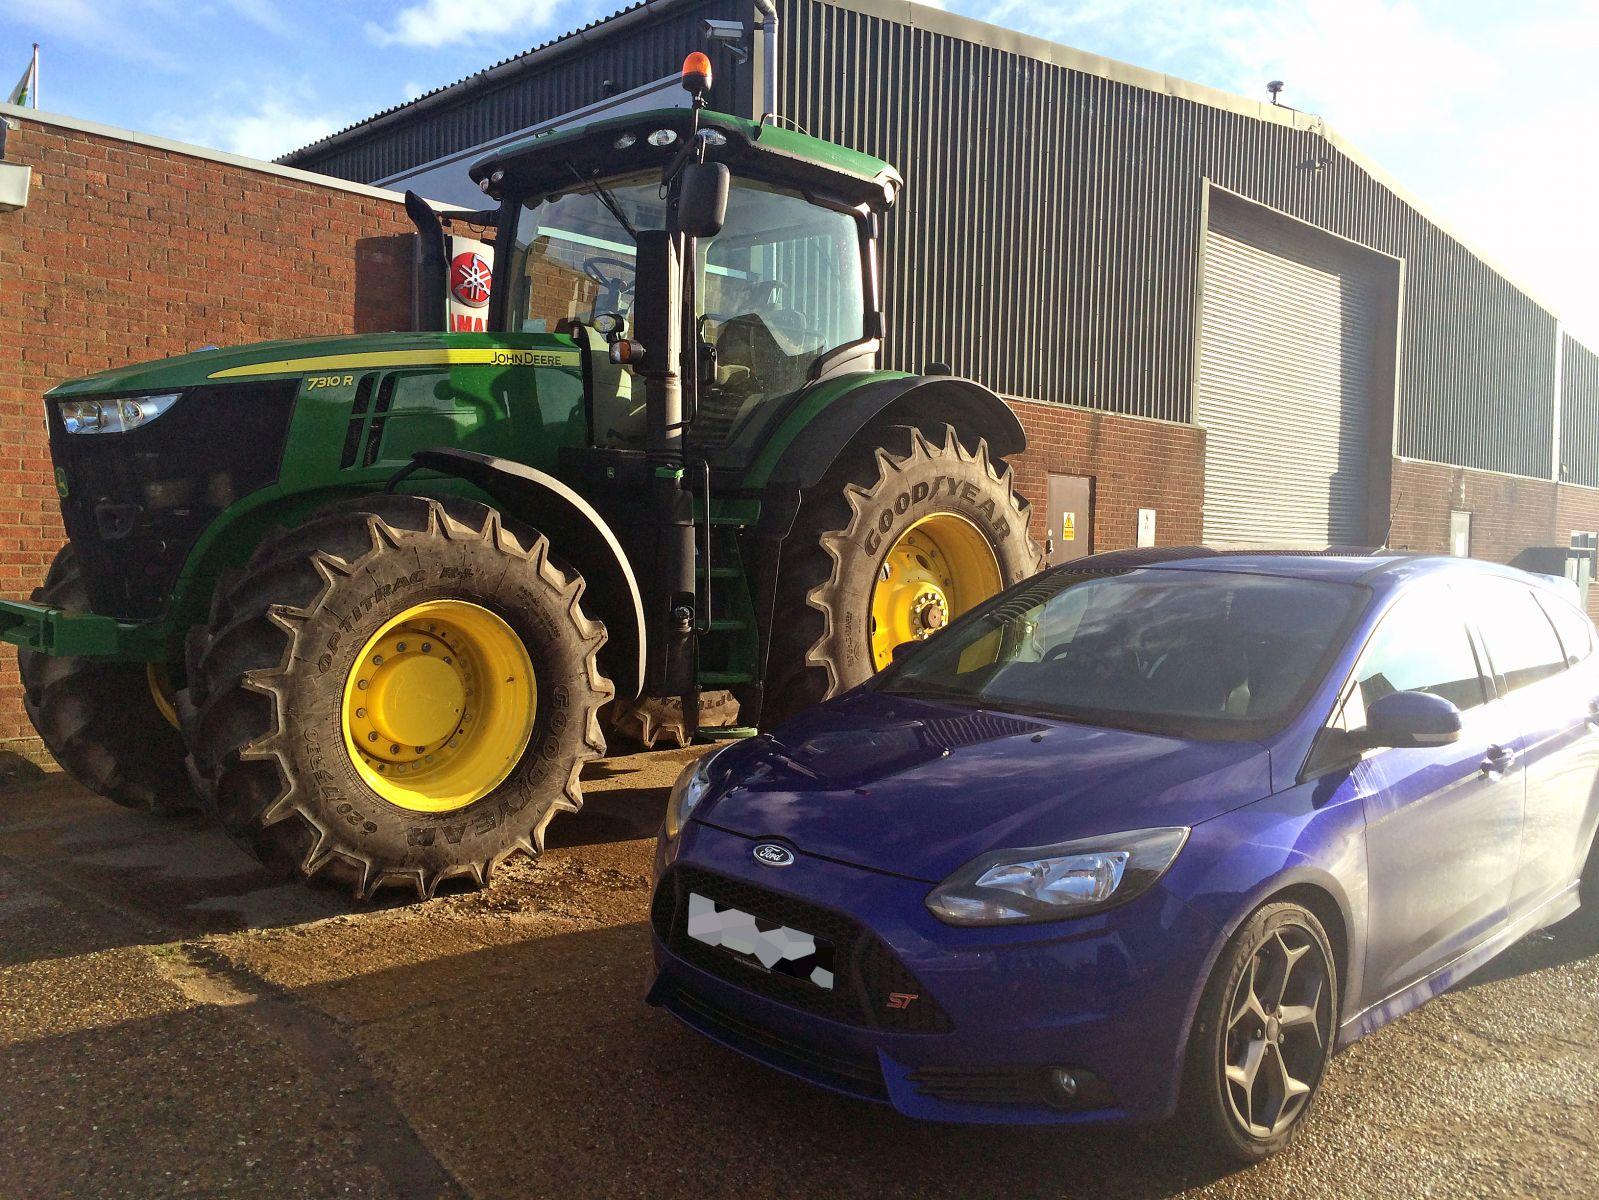 ST next to 7310R